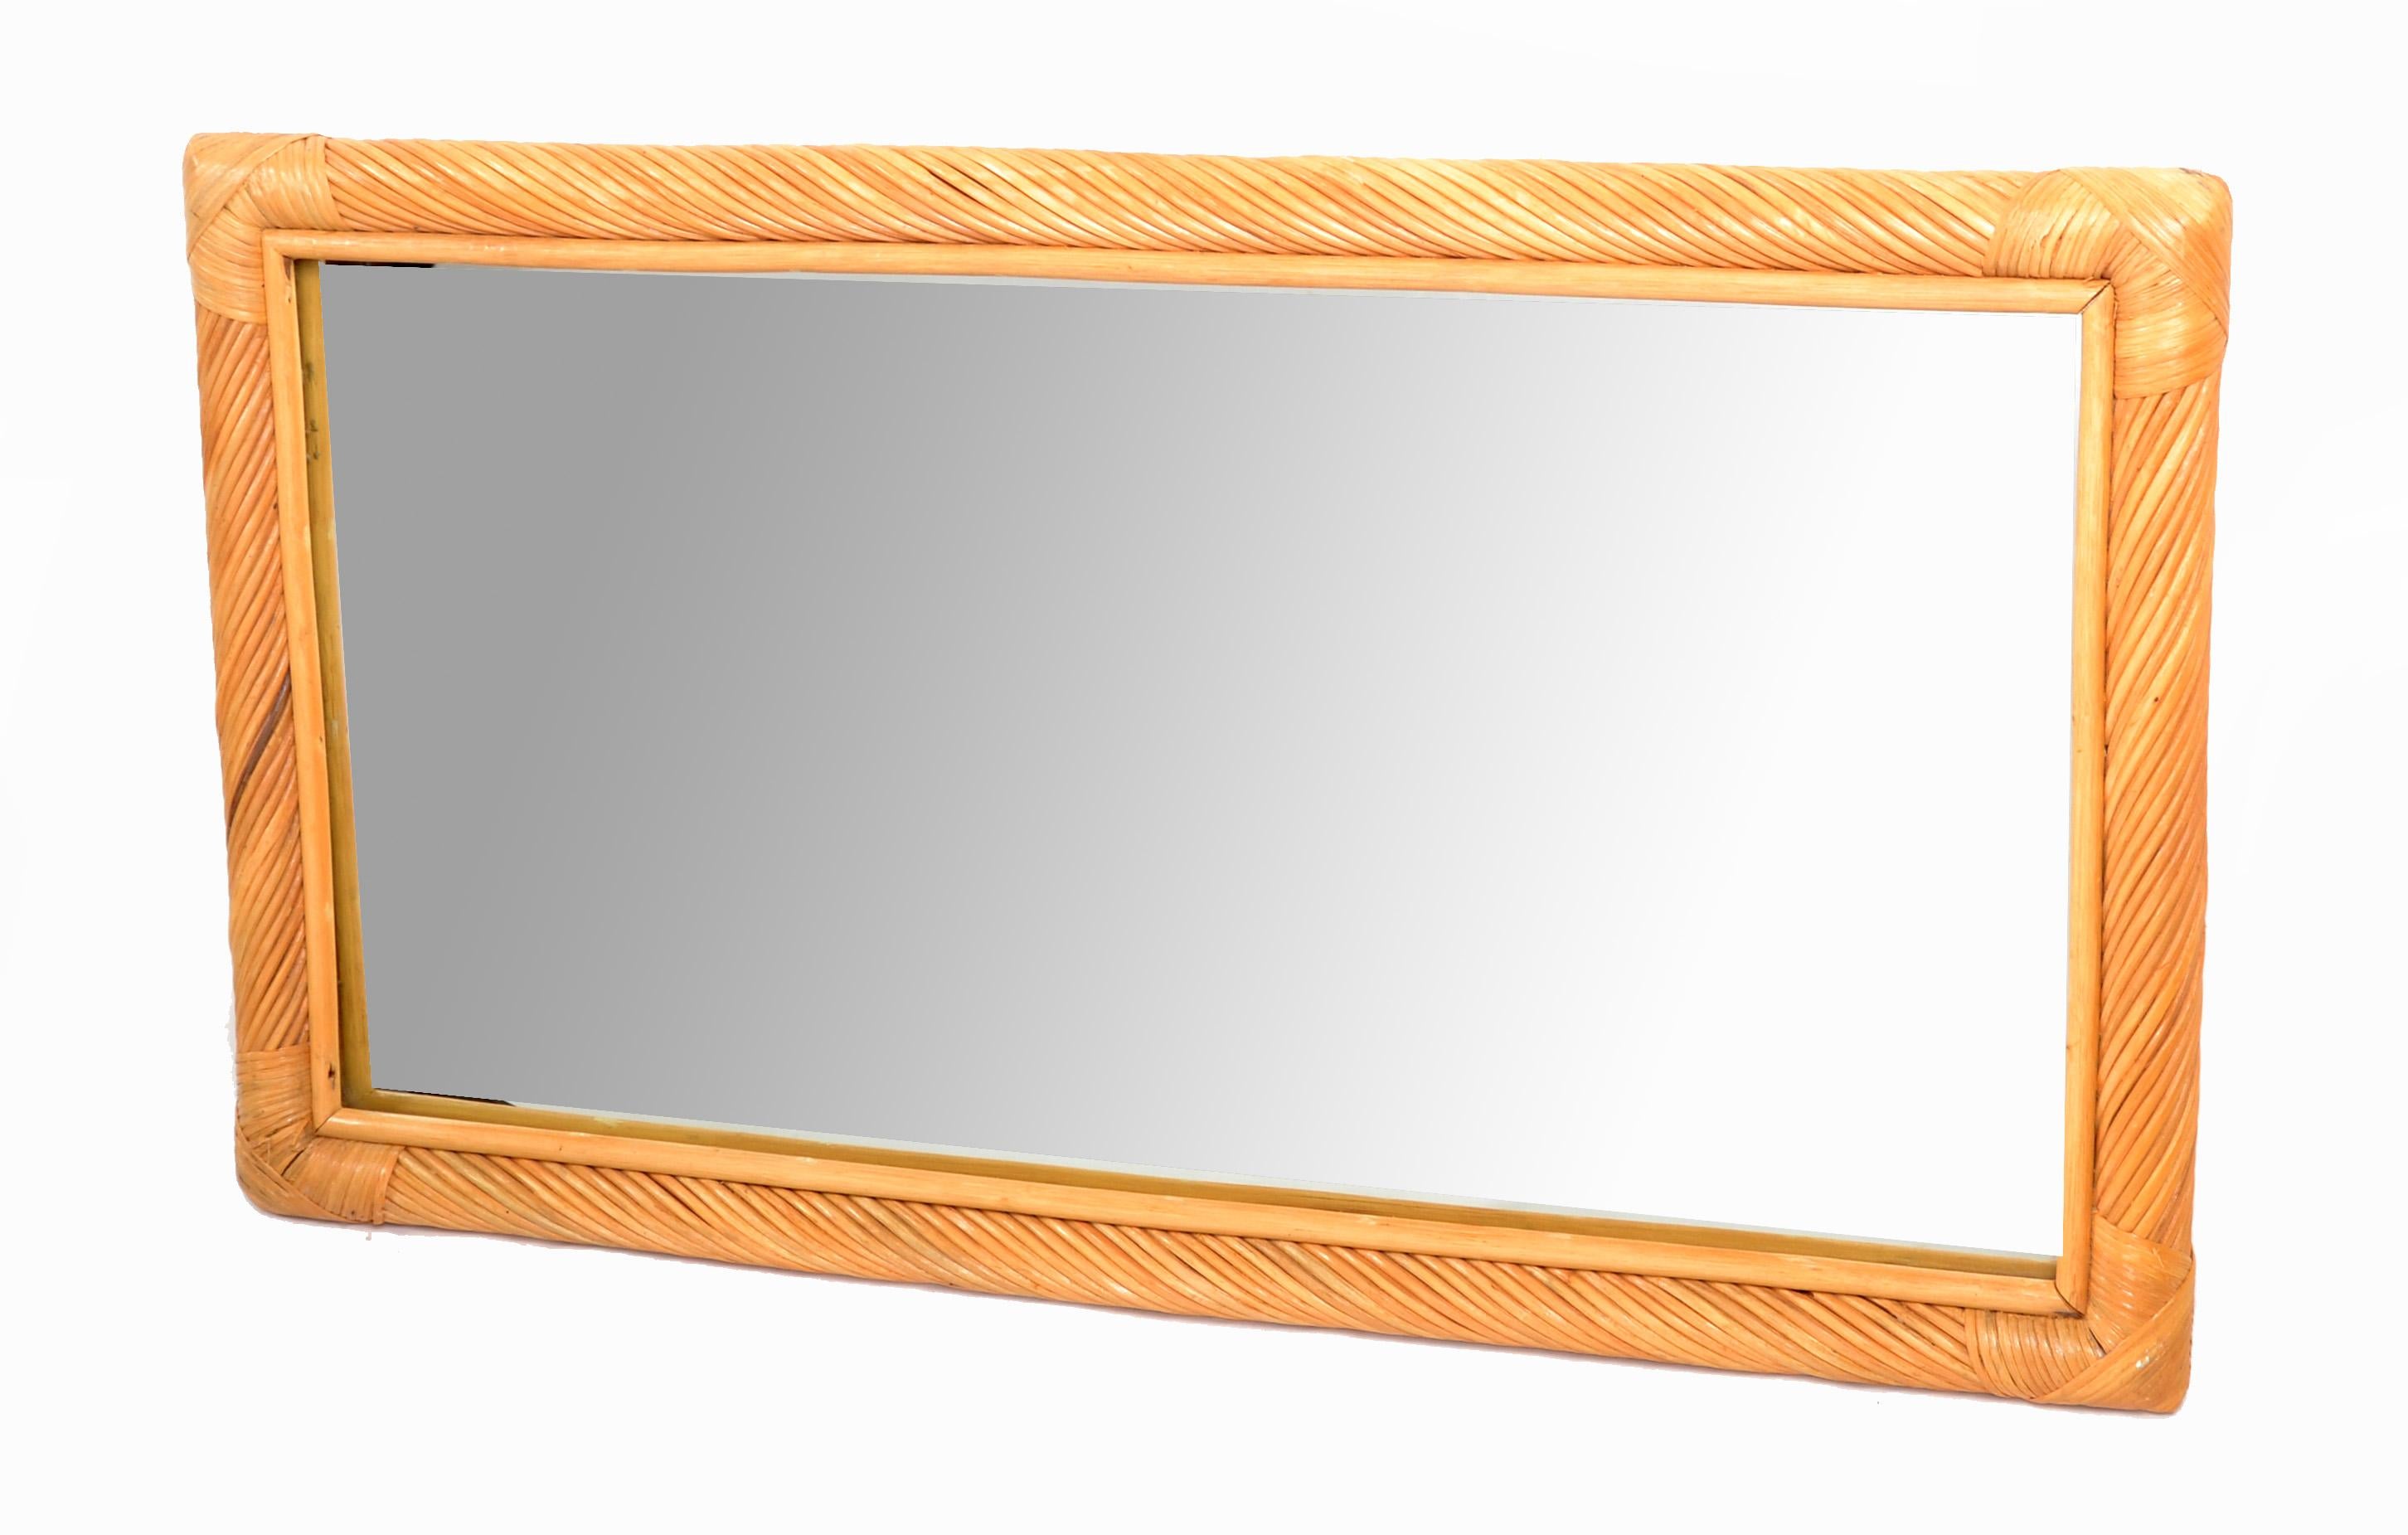 Hollywood Regency Bohemian Rectangular Handwoven Rattan and Bamboo Wall Mirror  For Sale 8